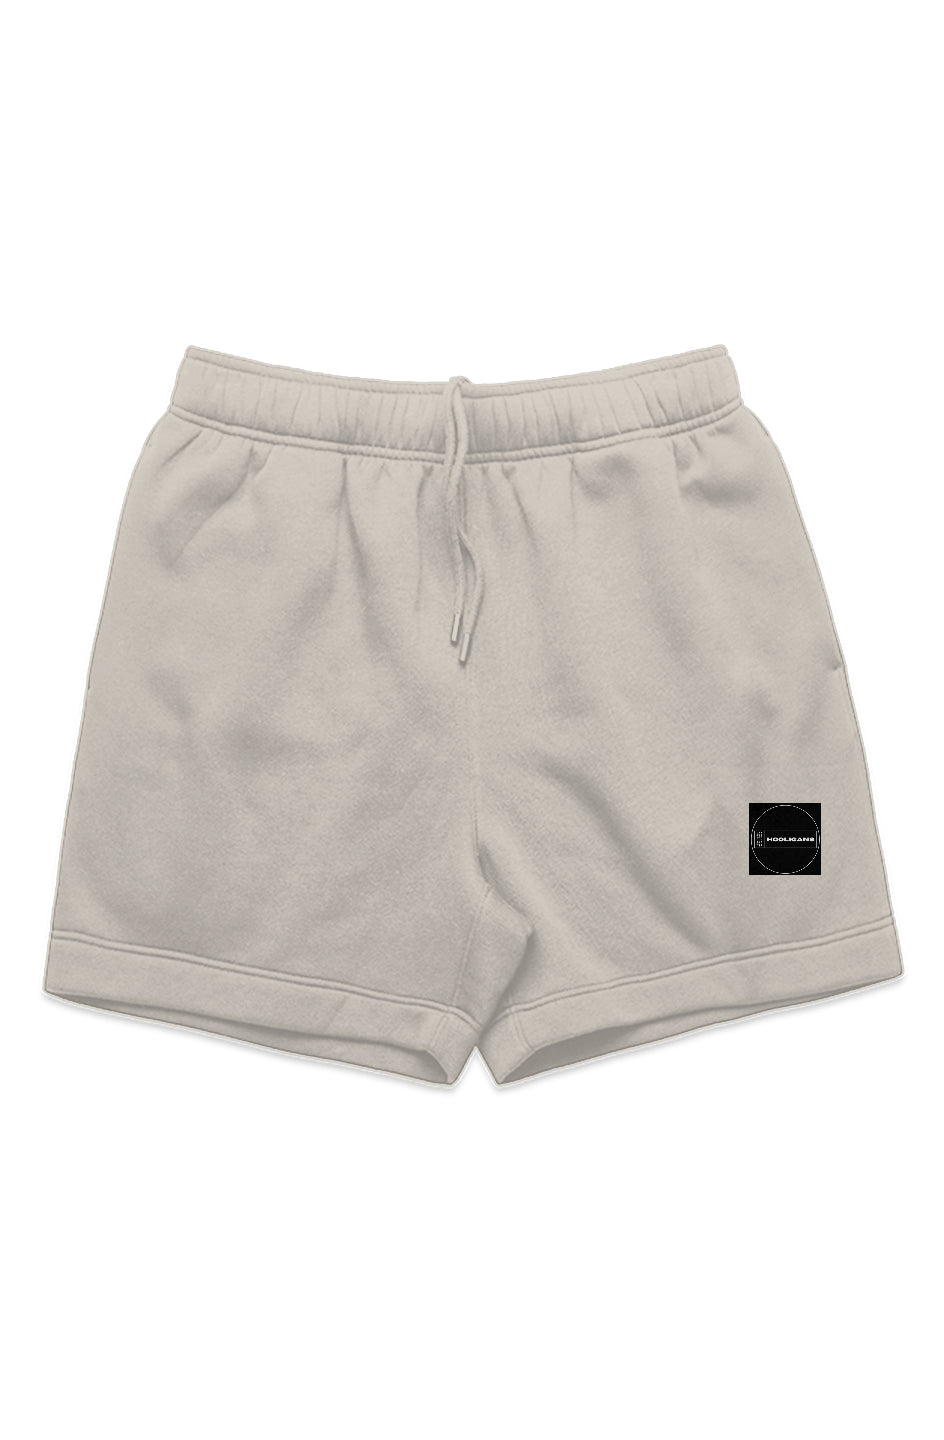 MENS RELAX TRACK SHORTS